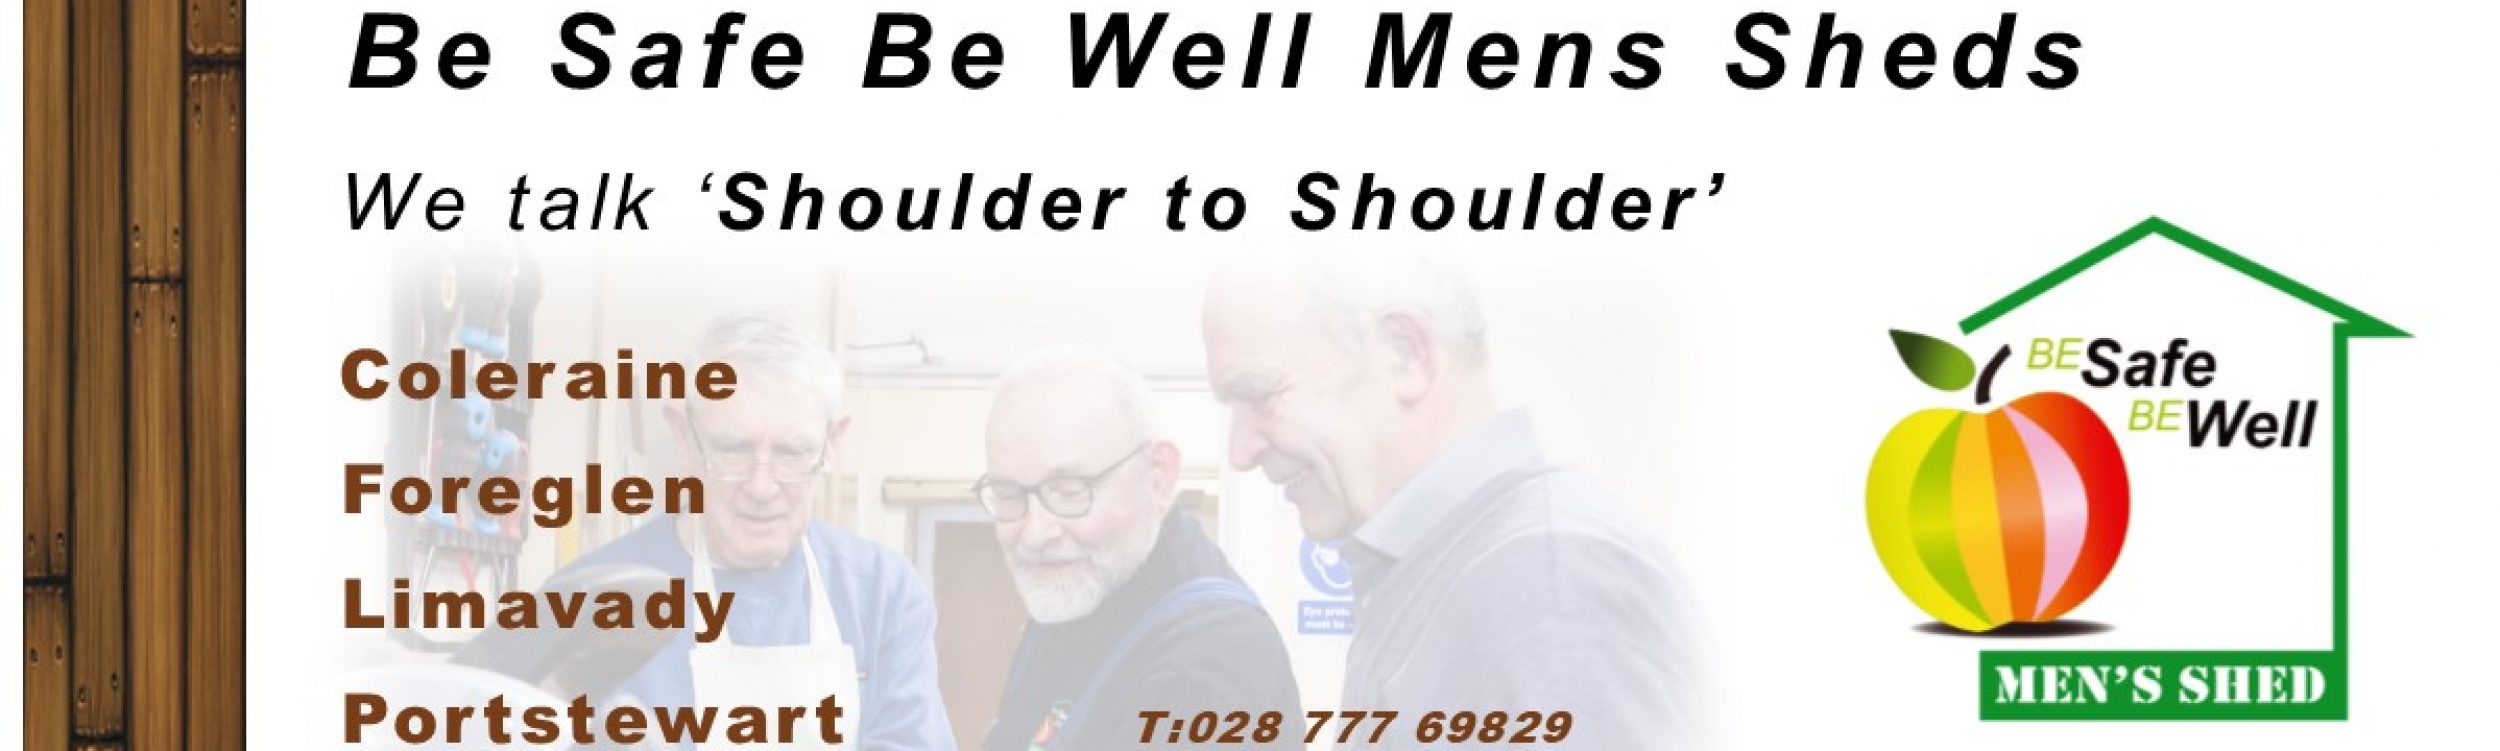 Be Safe Be Well Mens Sheds